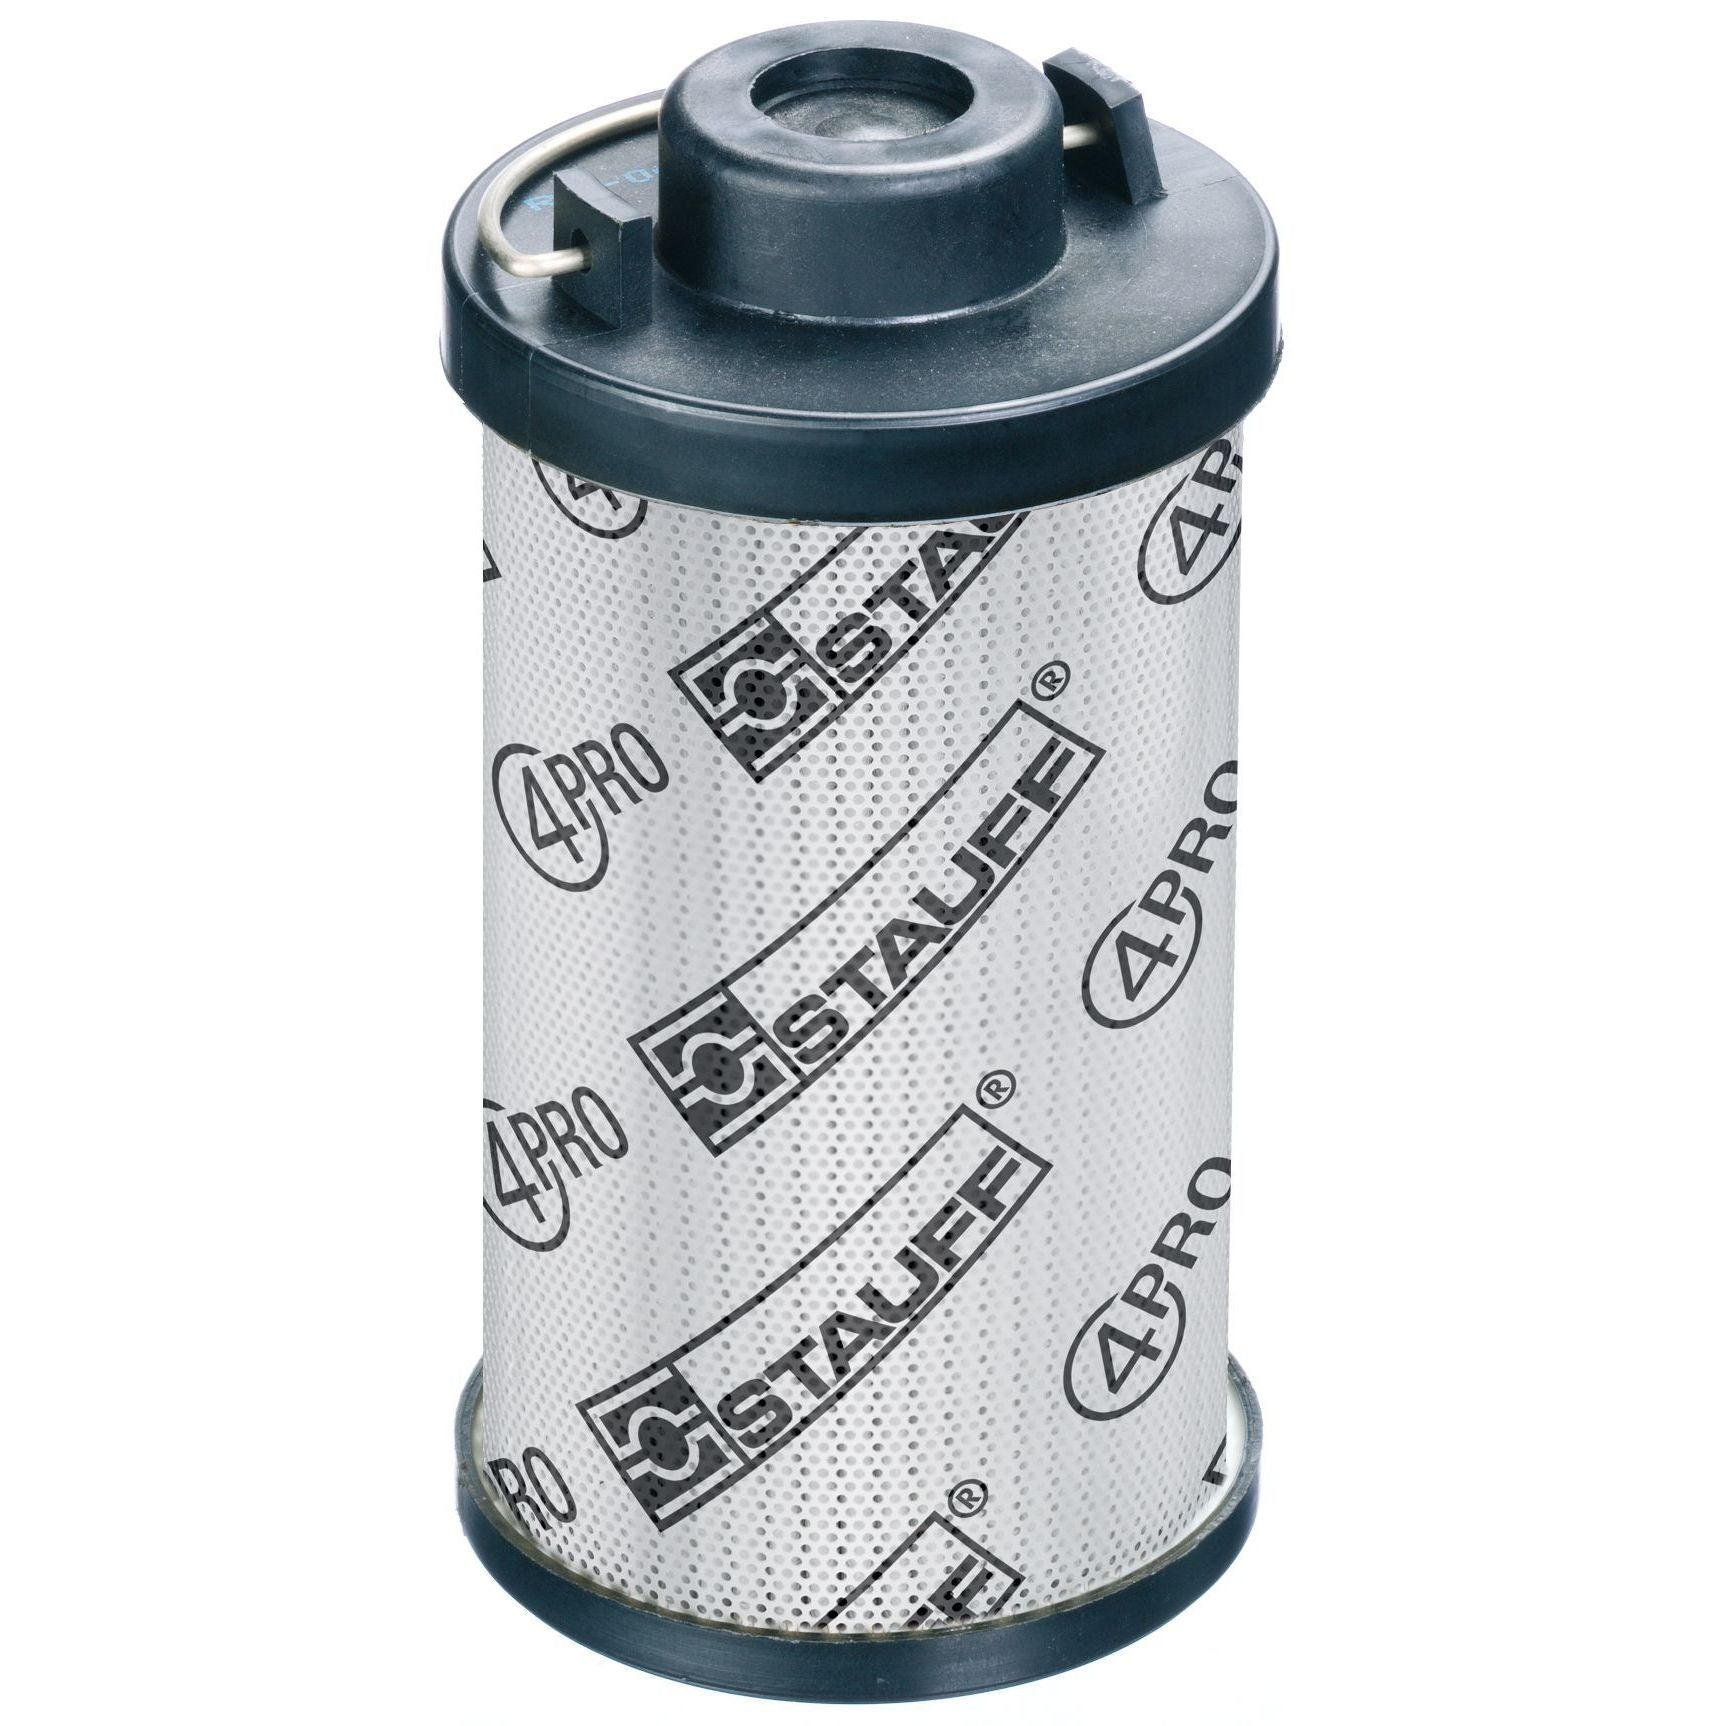 RE-240-G-20-V/4-NB : Stauff RF-240 Series Filter Element, 20 Micron, Synthetic, 363psi Collapse Differential, Viton Seals